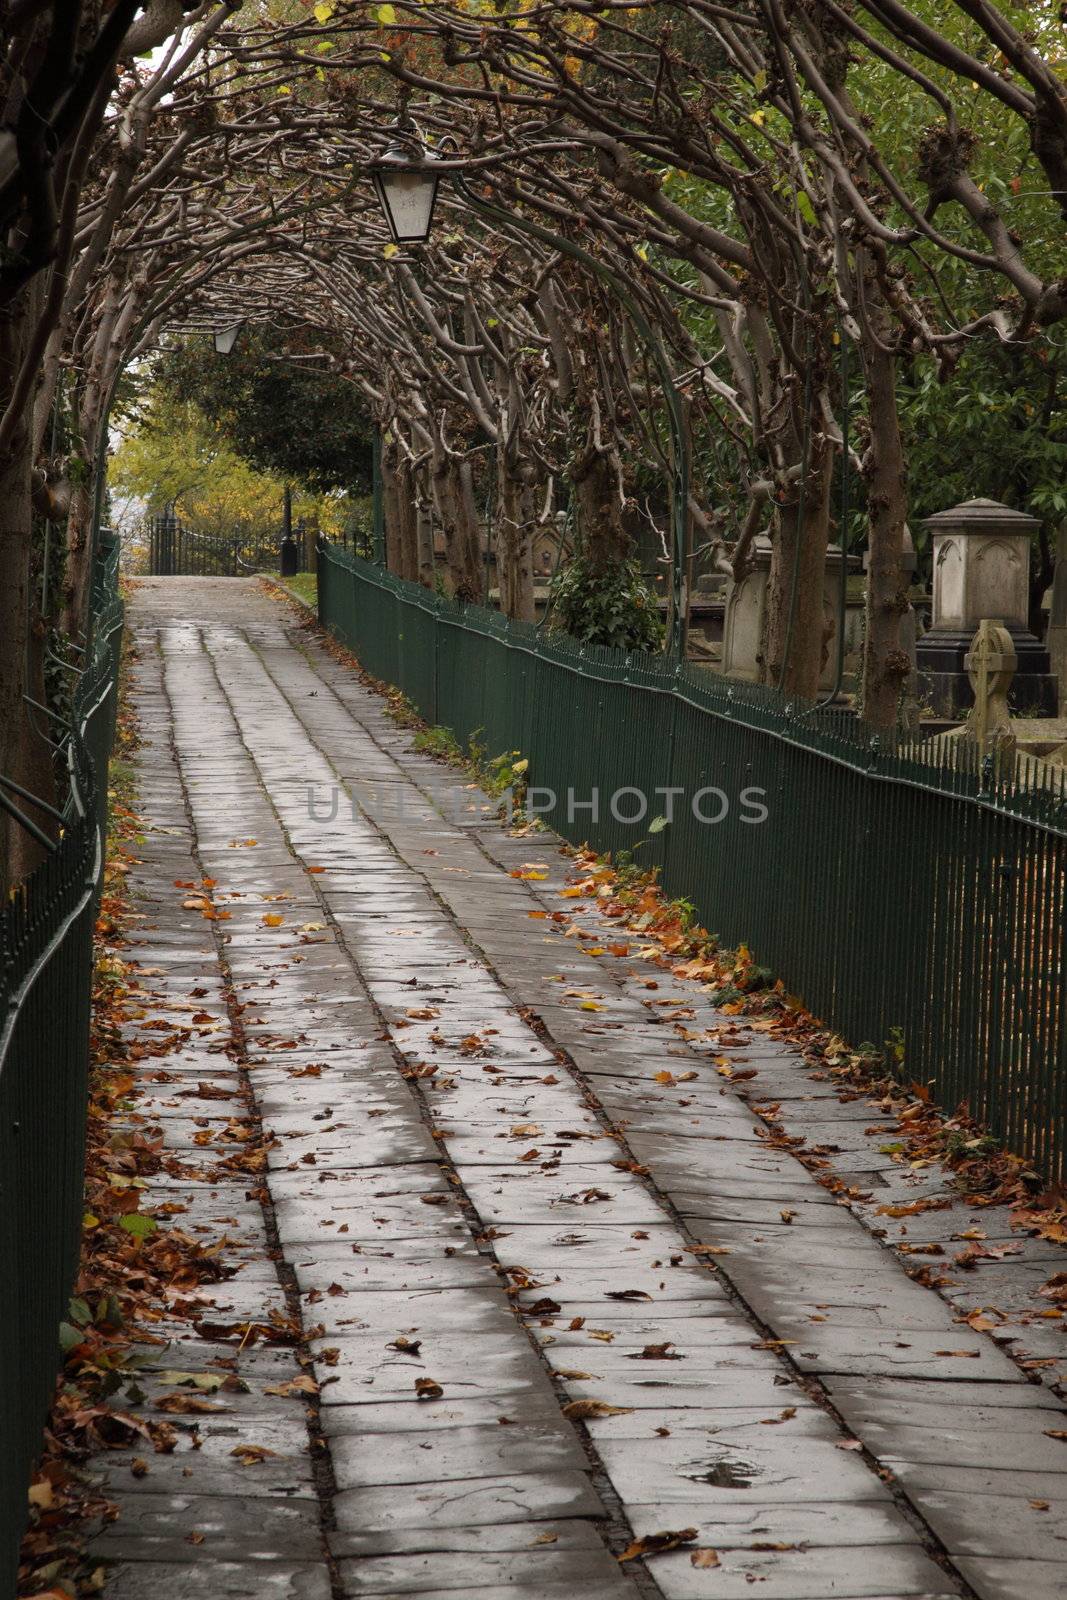 The Onset of Winter in Birdcage Walk by pjhpix